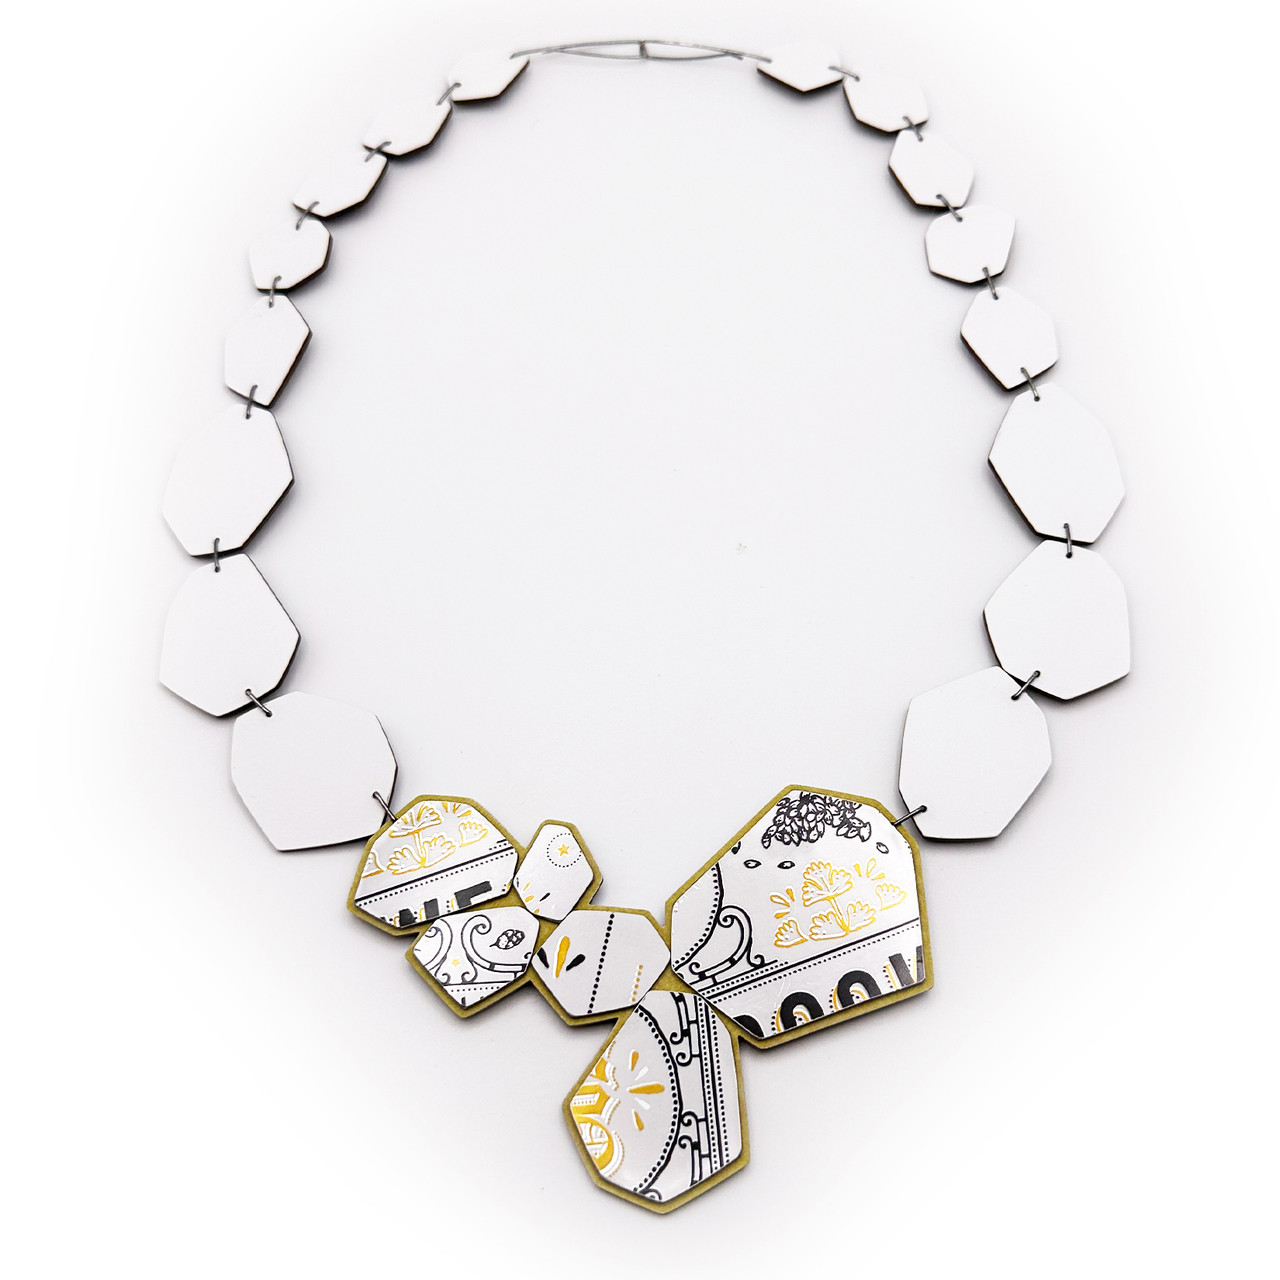 Carli Brew Recycled Laminate Necklace in White & Gold, Zulay & Stephanie Smith, tomfoolery